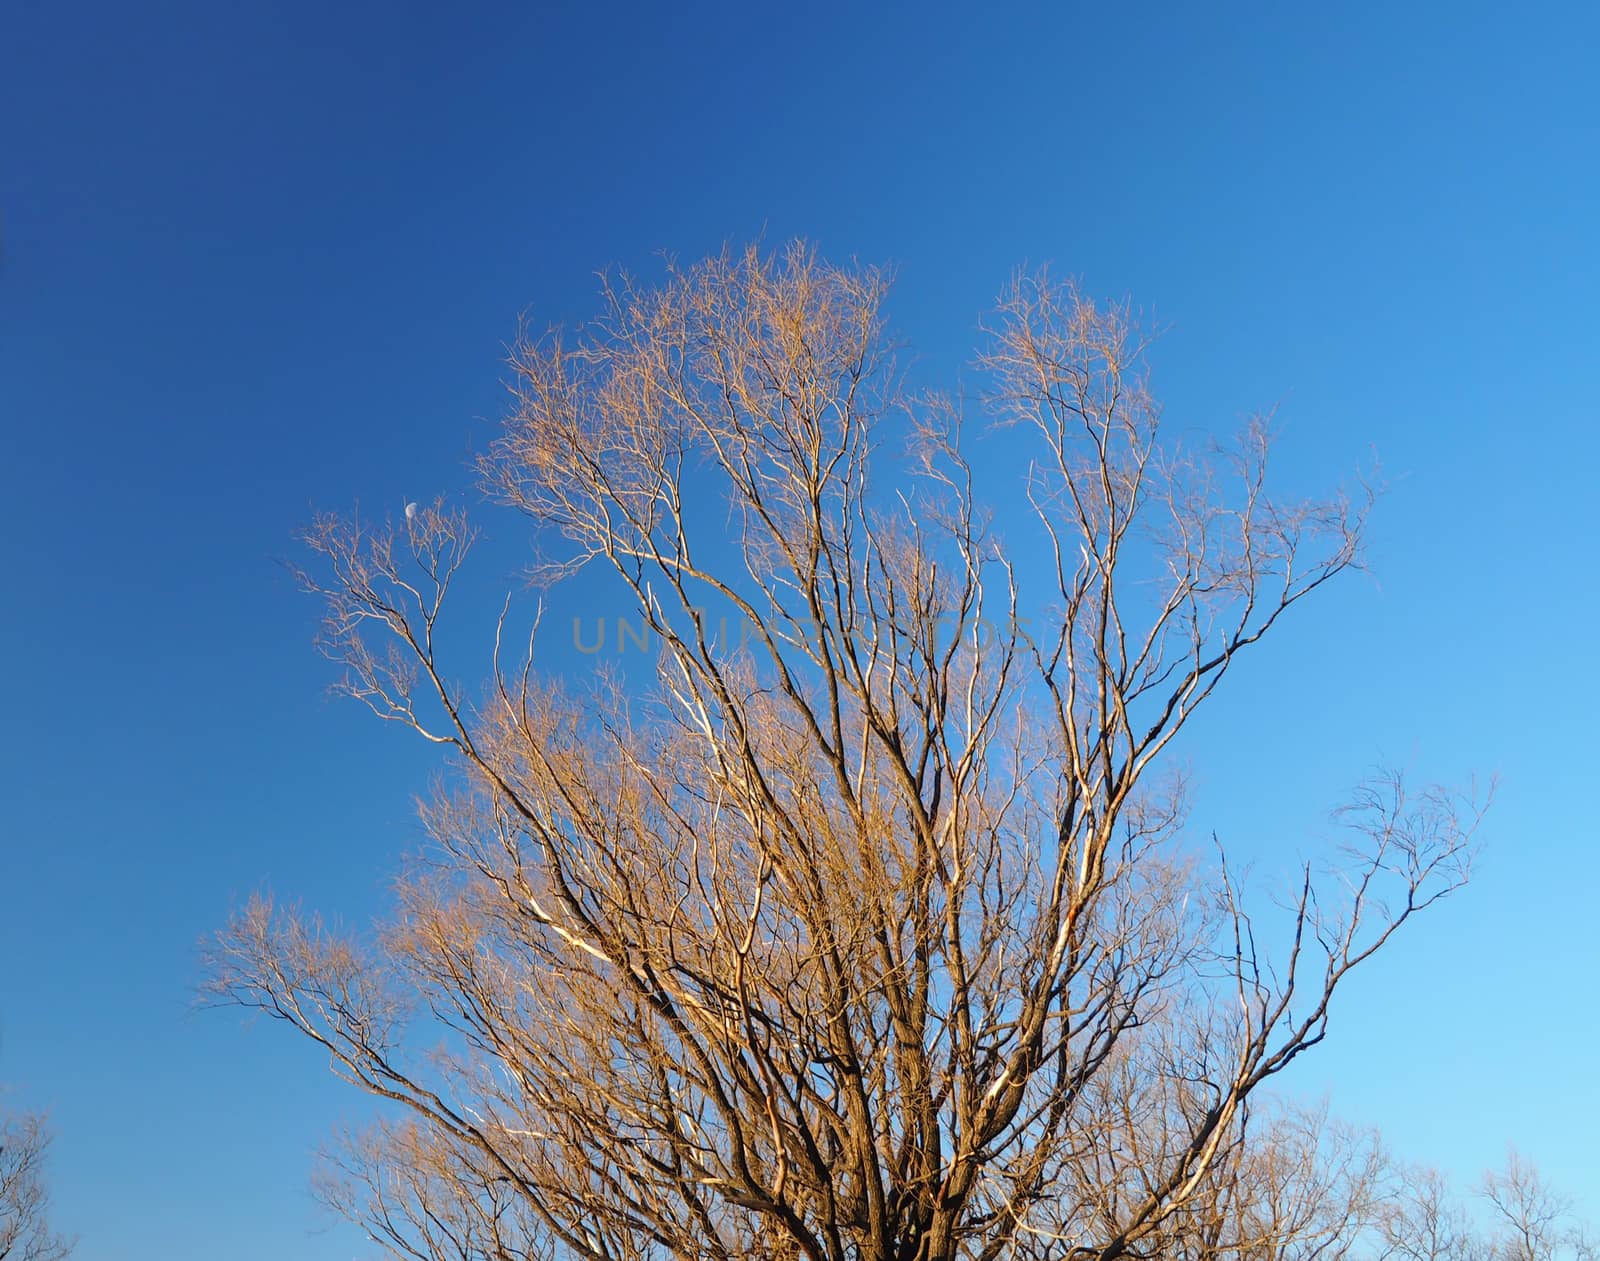 Dry tree stand in winter and clear blue sky at Tokyo Japan.